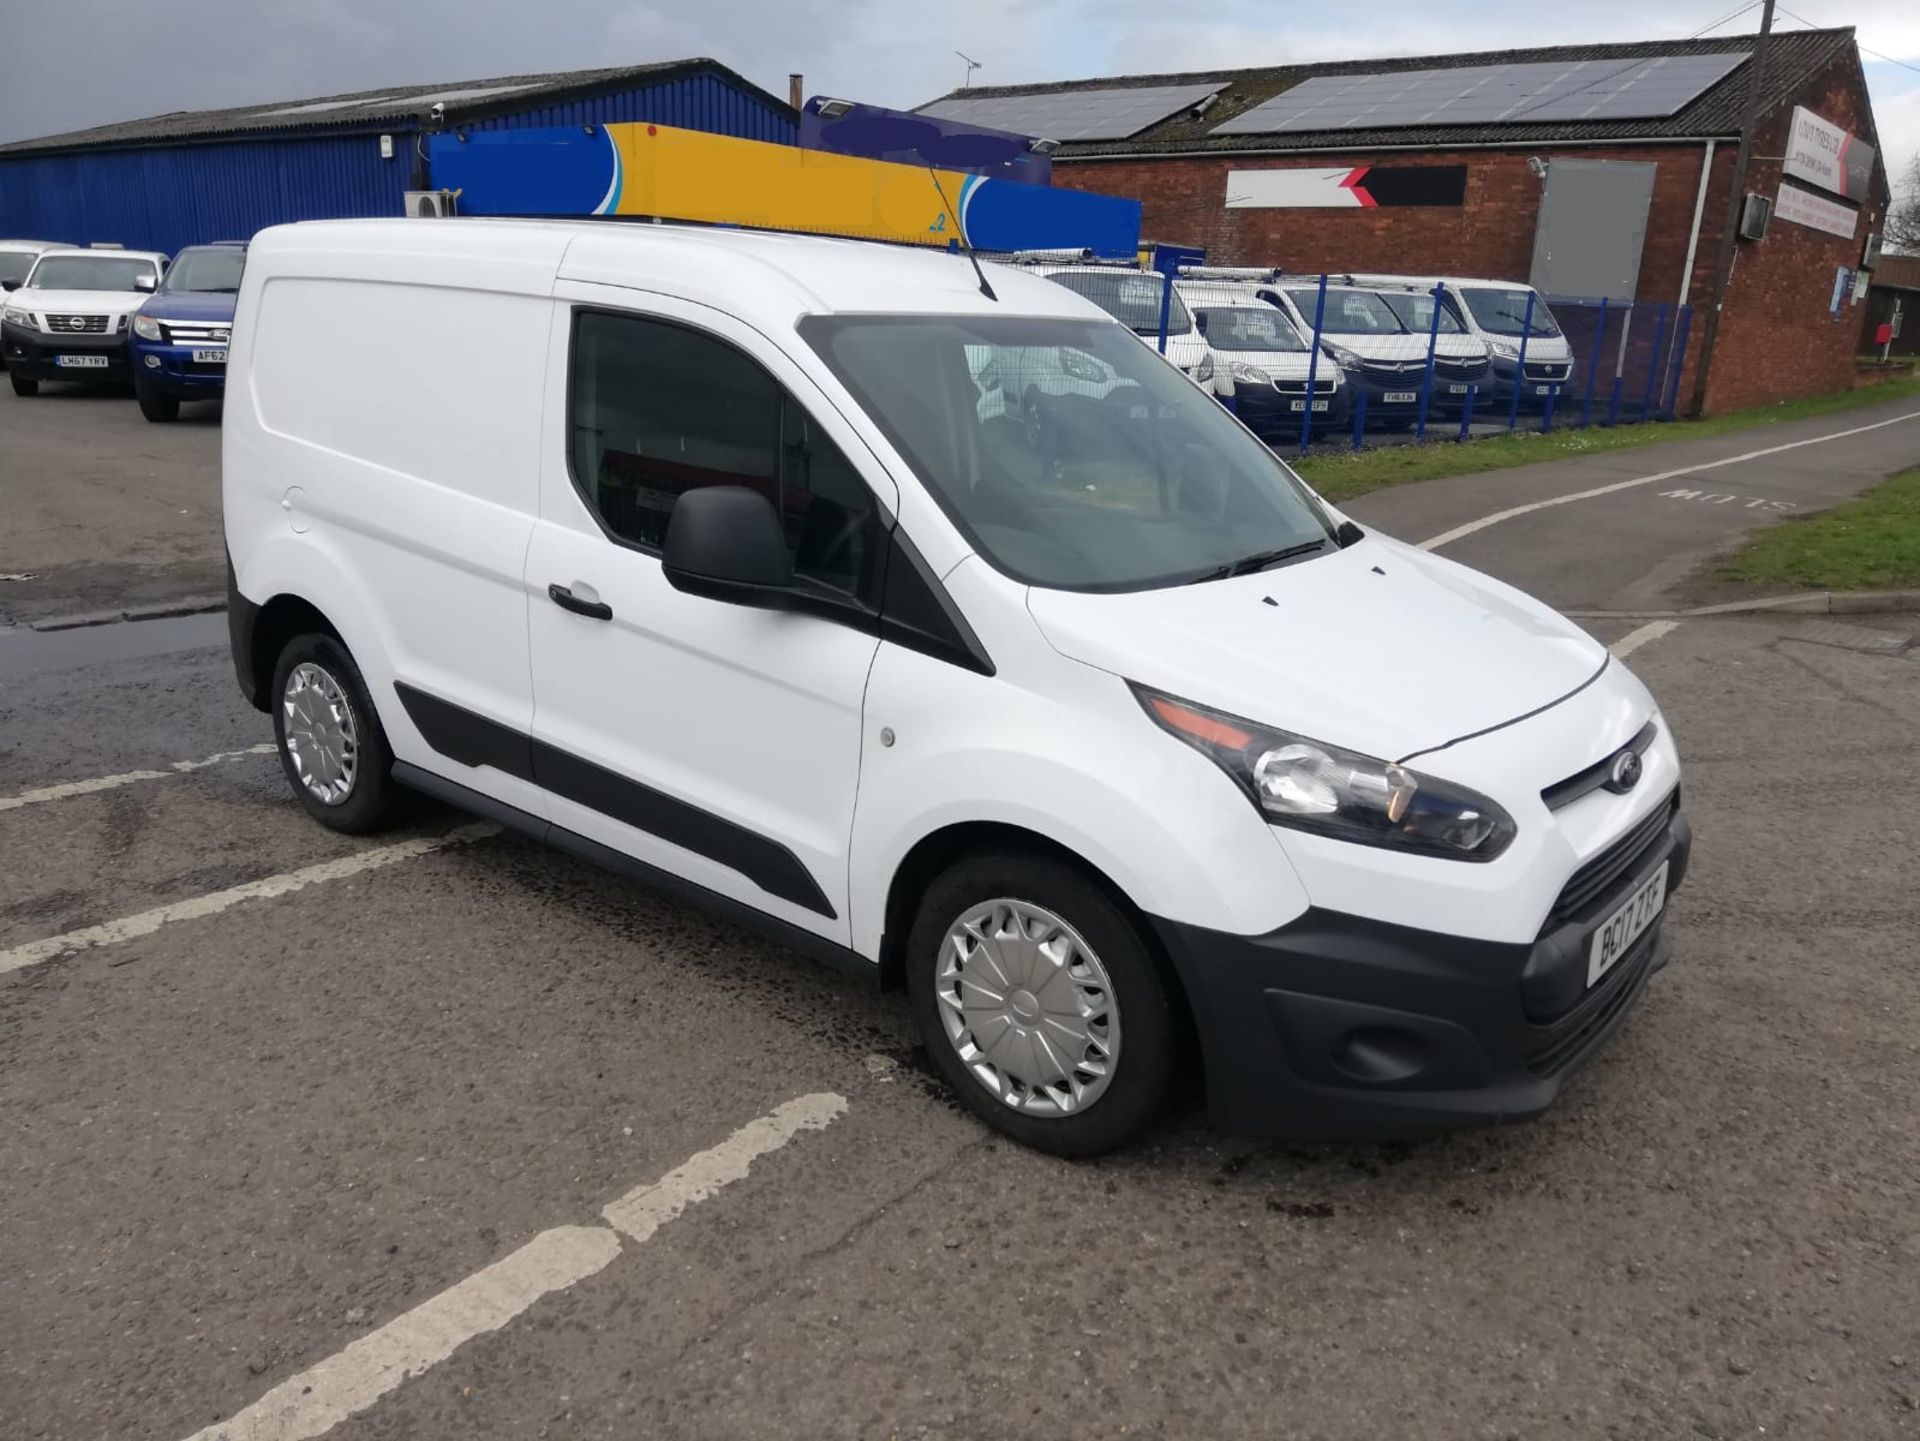 2017 17 FORD TRANSIT CONNECT PANEL VAN - EURO 6 - 145K MILES - PLY LINED